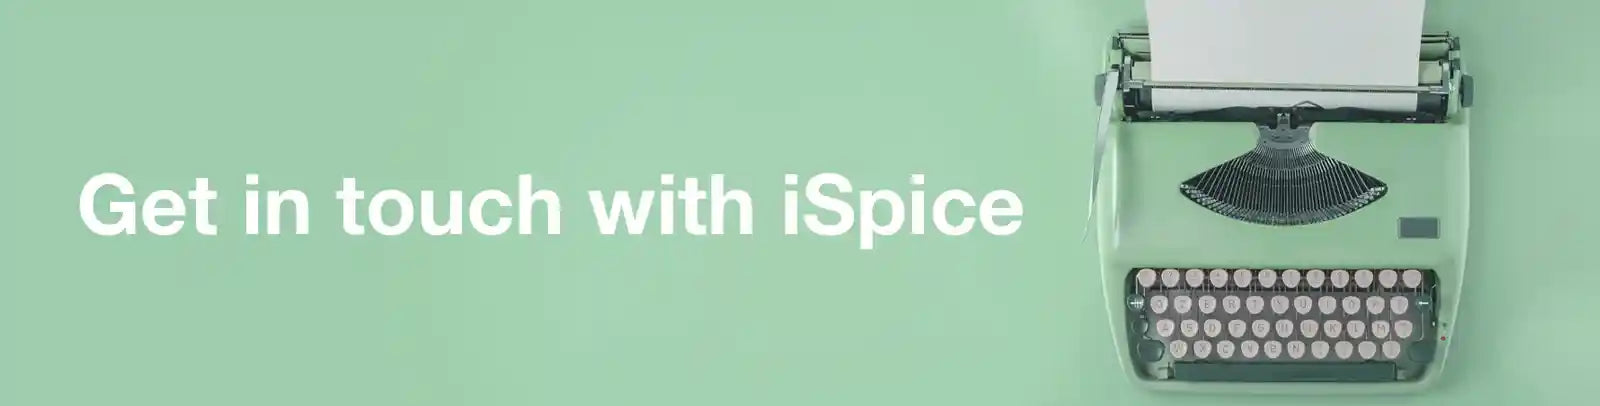 Contact ISPICE to Get the Best Services